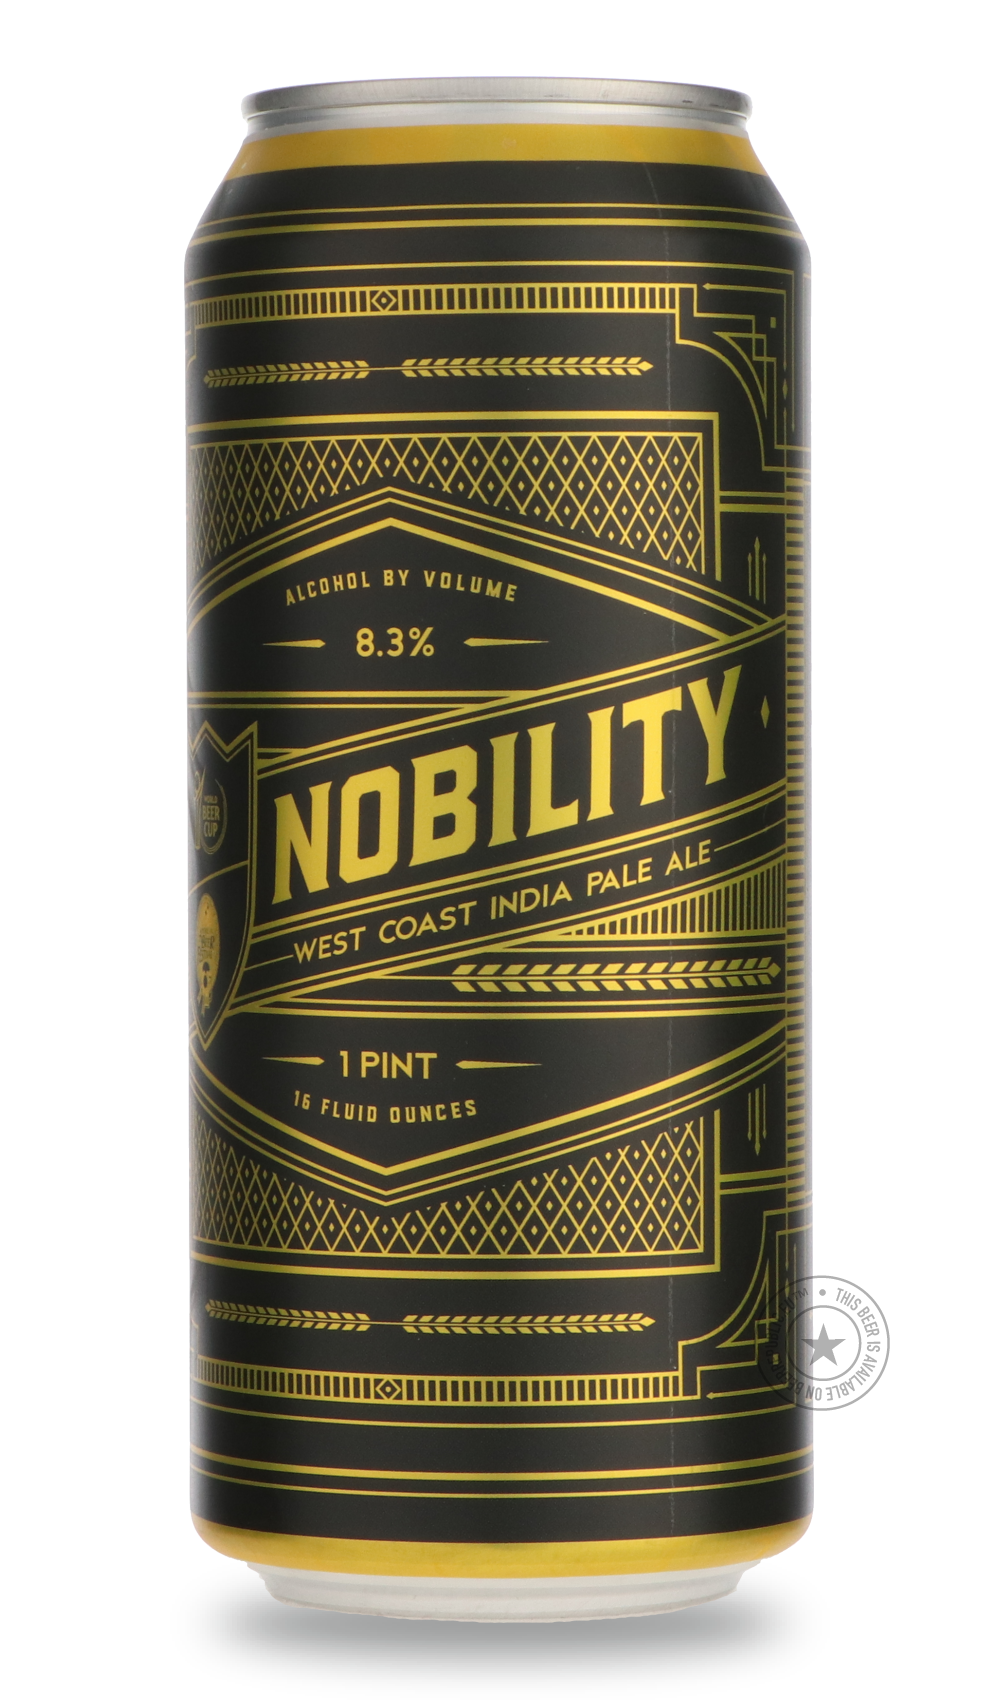 -Noble- Nobility-IPA- Only @ Beer Republic - The best online beer store for American & Canadian craft beer - Buy beer online from the USA and Canada - Bier online kopen - Amerikaans bier kopen - Craft beer store - Craft beer kopen - Amerikanisch bier kaufen - Bier online kaufen - Acheter biere online - IPA - Stout - Porter - New England IPA - Hazy IPA - Imperial Stout - Barrel Aged - Barrel Aged Imperial Stout - Brown - Dark beer - Blond - Blonde - Pilsner - Lager - Wheat - Weizen - Amber - Barley Wine - Qu